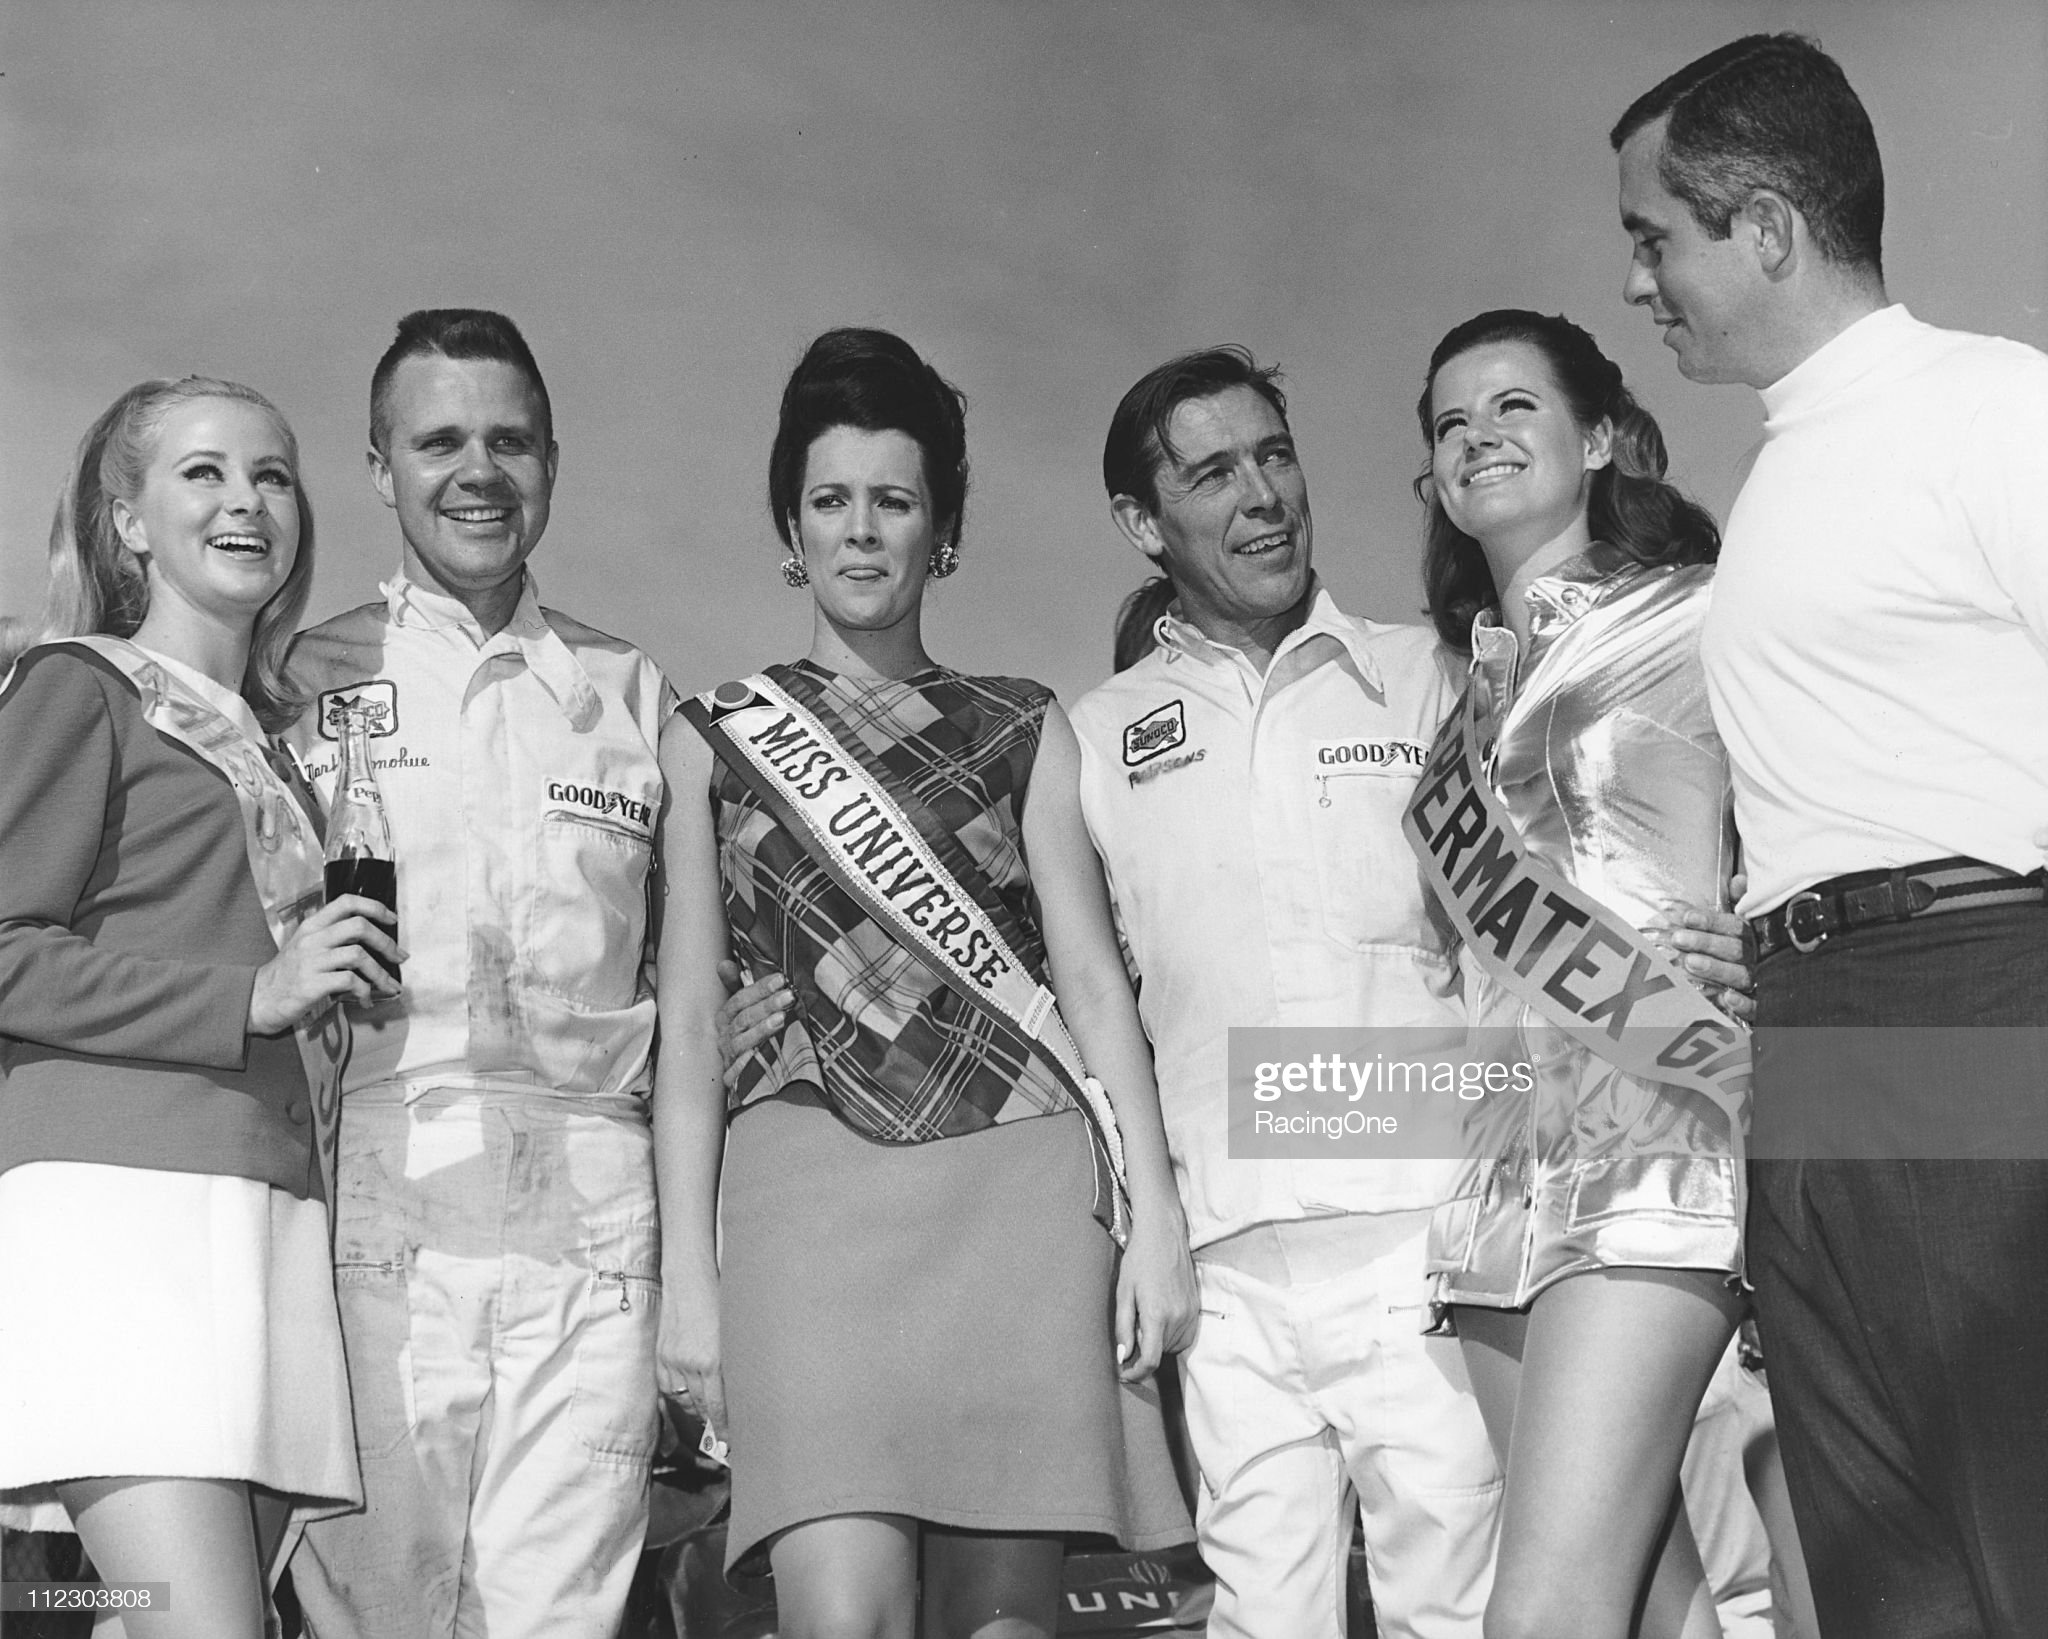 Daytona Beach, Florida, February 02, 1969. Drivers Mark Donohue and Chuck Parsons are joined in victory lane by car owner Roger Penske and three of the race queens.